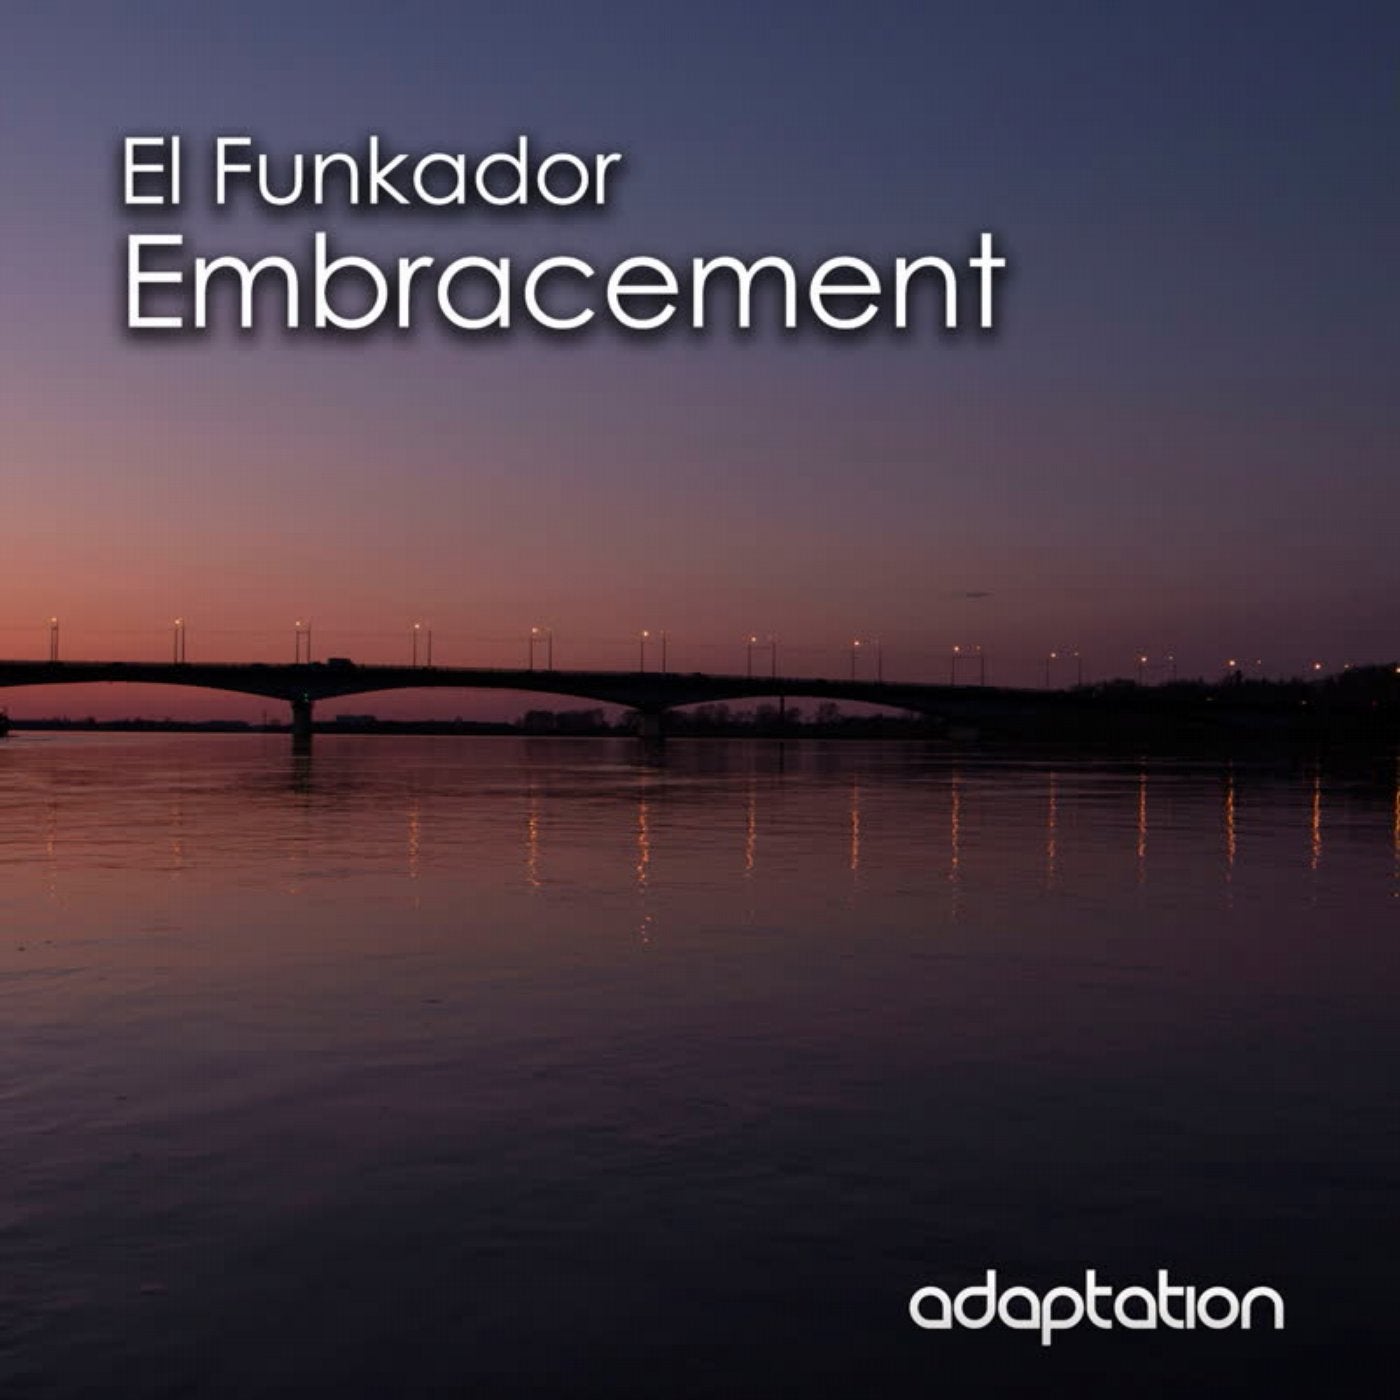 Embracement